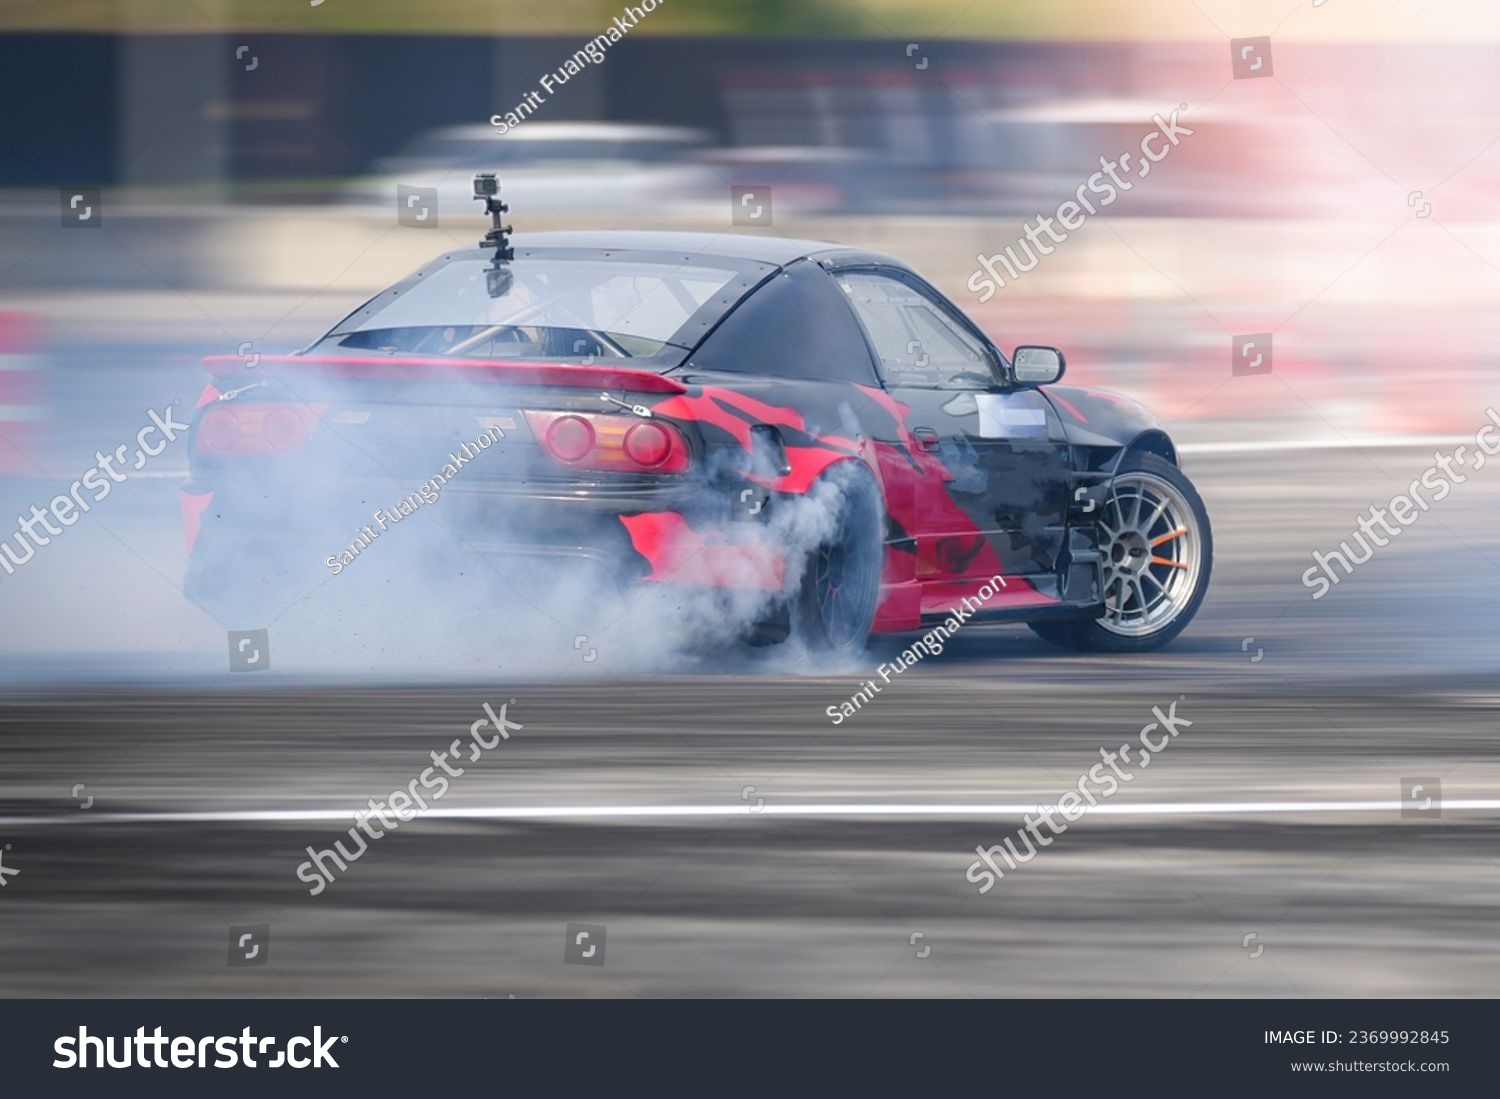 Drifting Sports sedan with modified engine and suspension action car slide faster on asphalt track speed motion blurred  with wheel tire  turning slip burn rubber smoke, Drift motor sport car racing . #2369992845